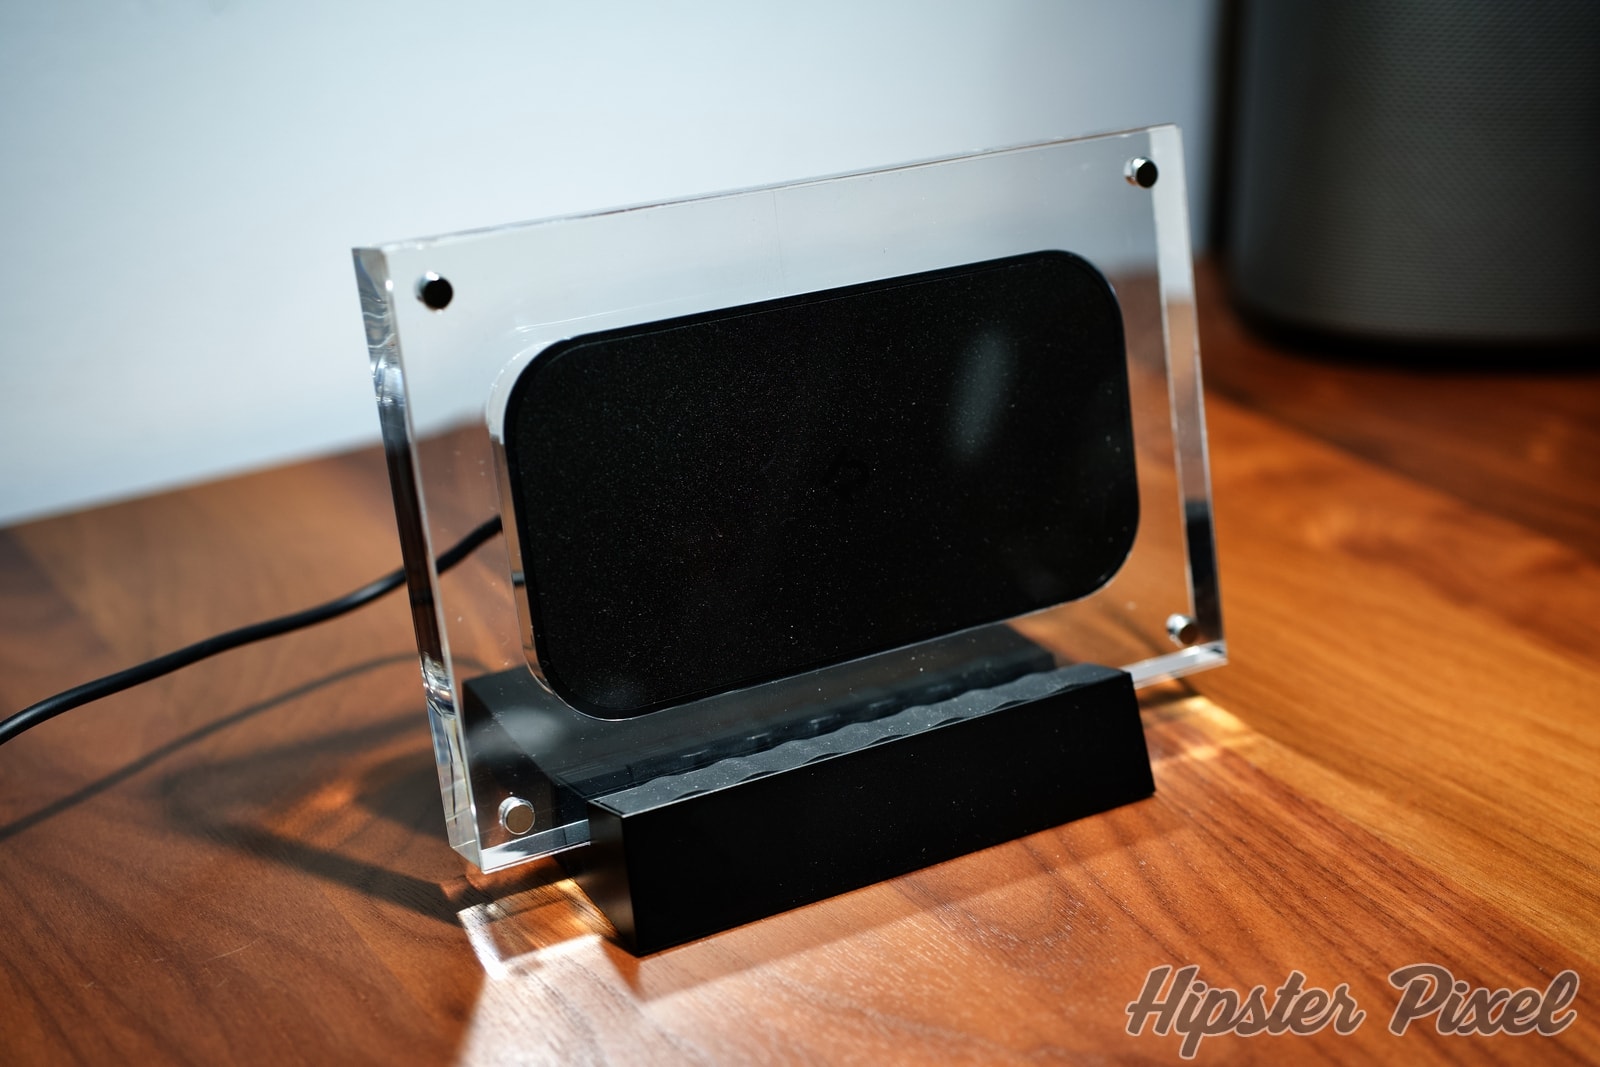 PowerPic mod Wireless Charger on its side